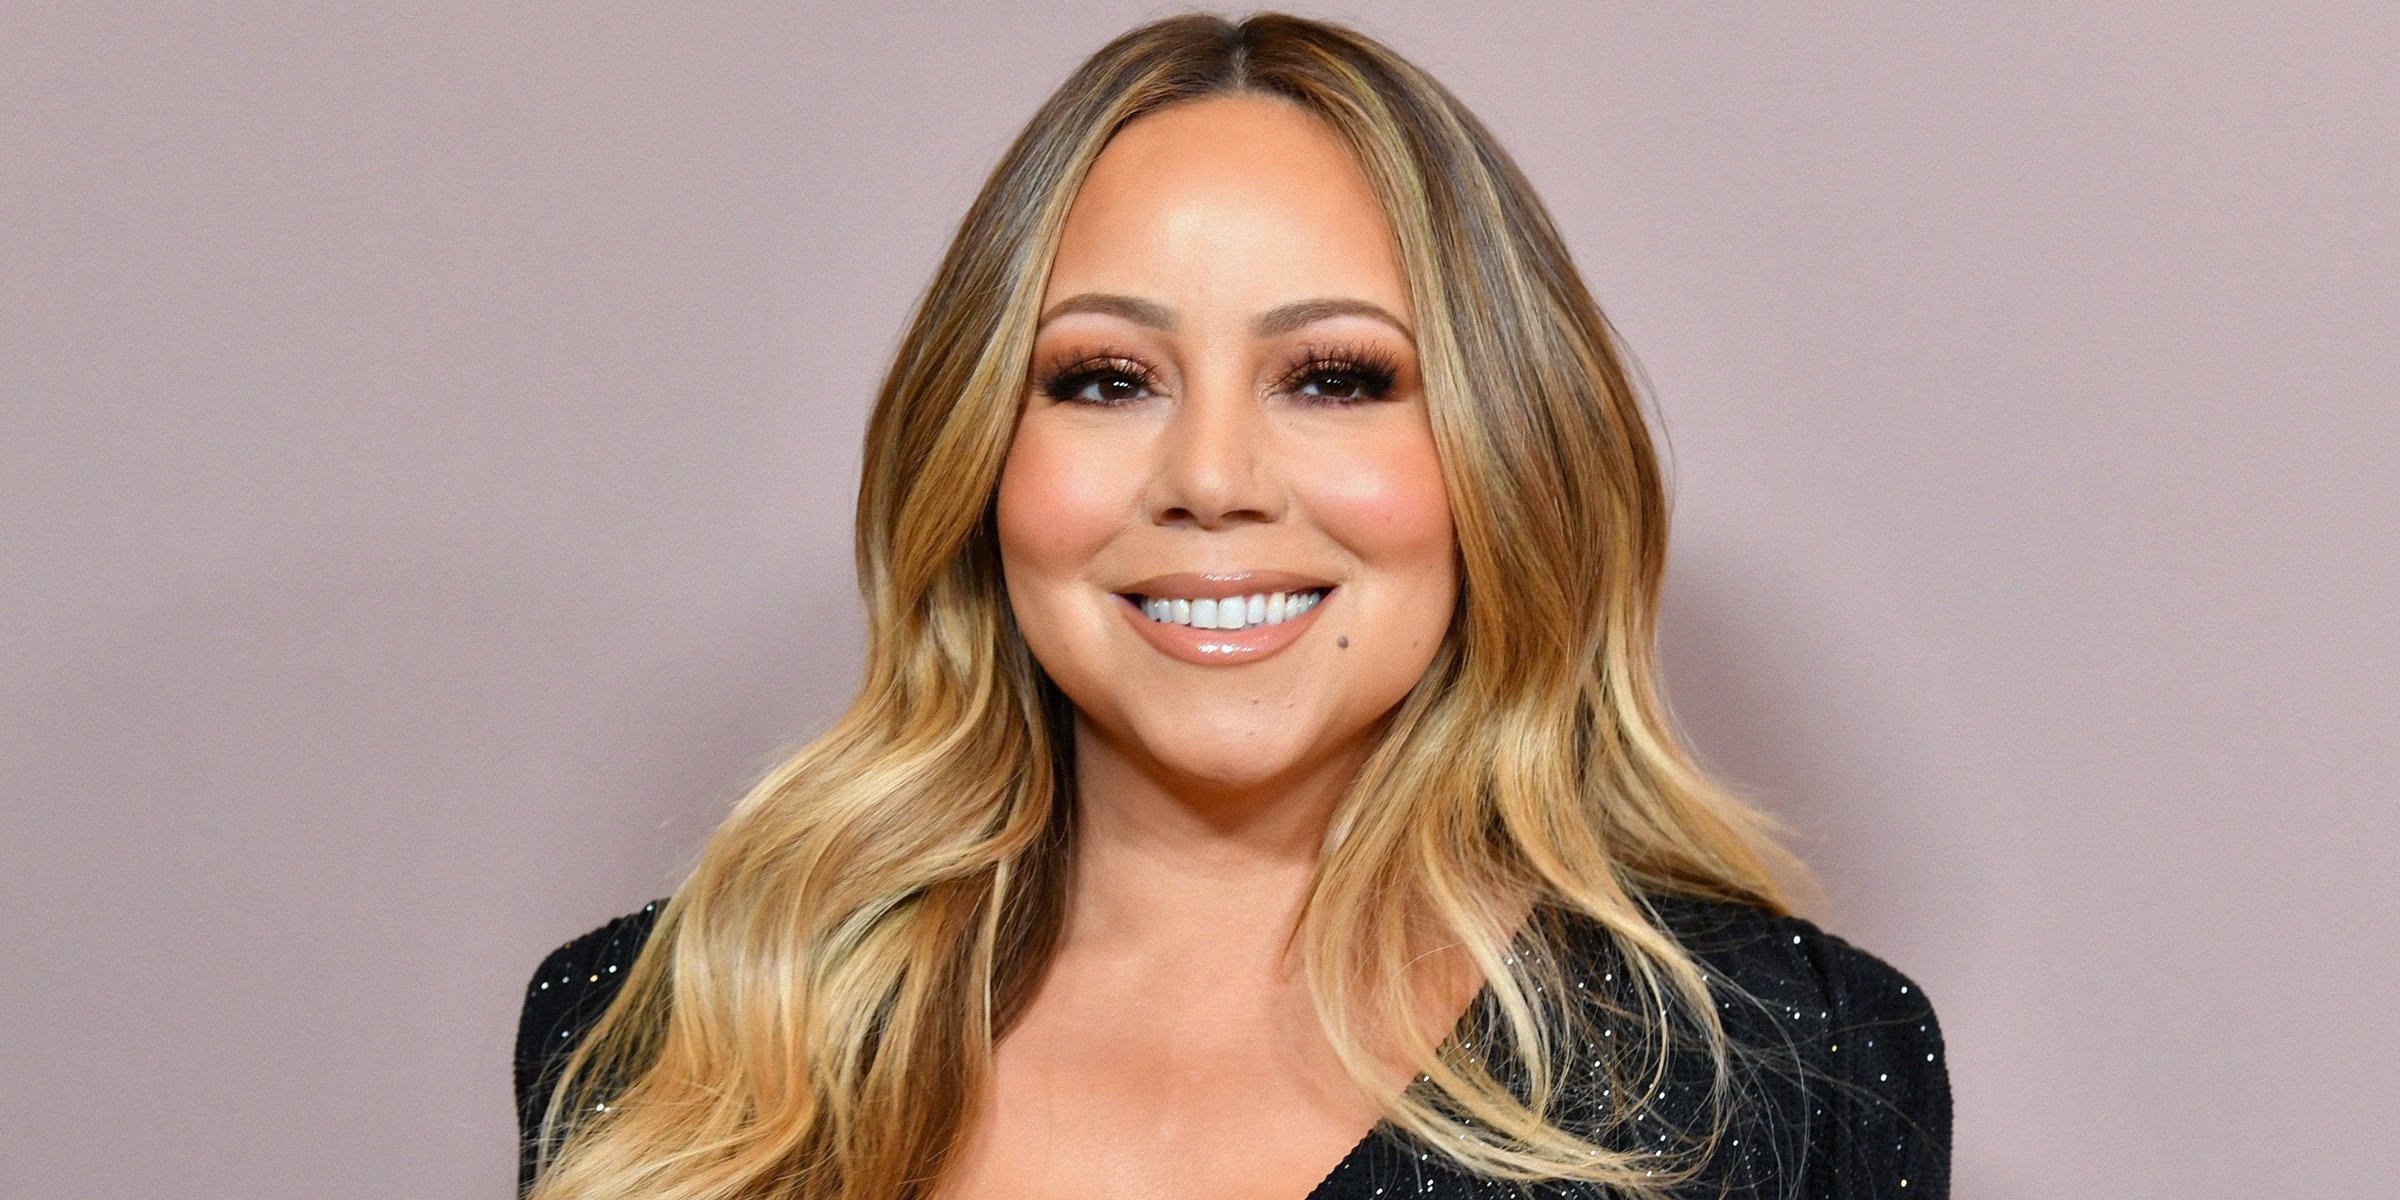 Mariah Carey ┃Source: Getty Images